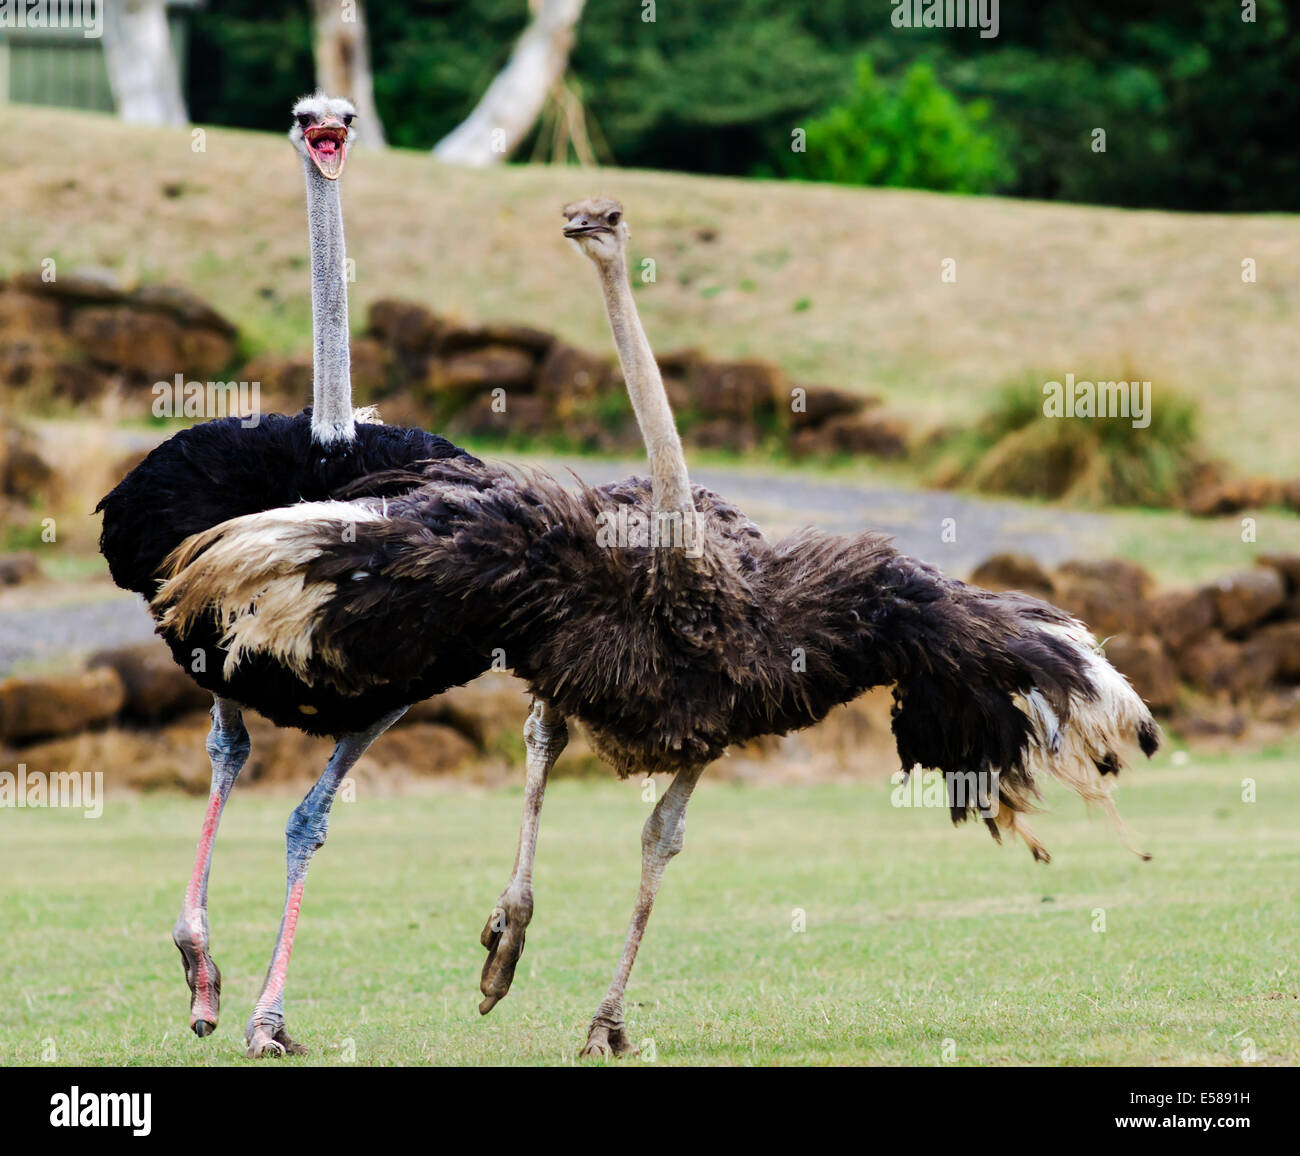 Two Ostriches running, Struthio camels Stock Photo